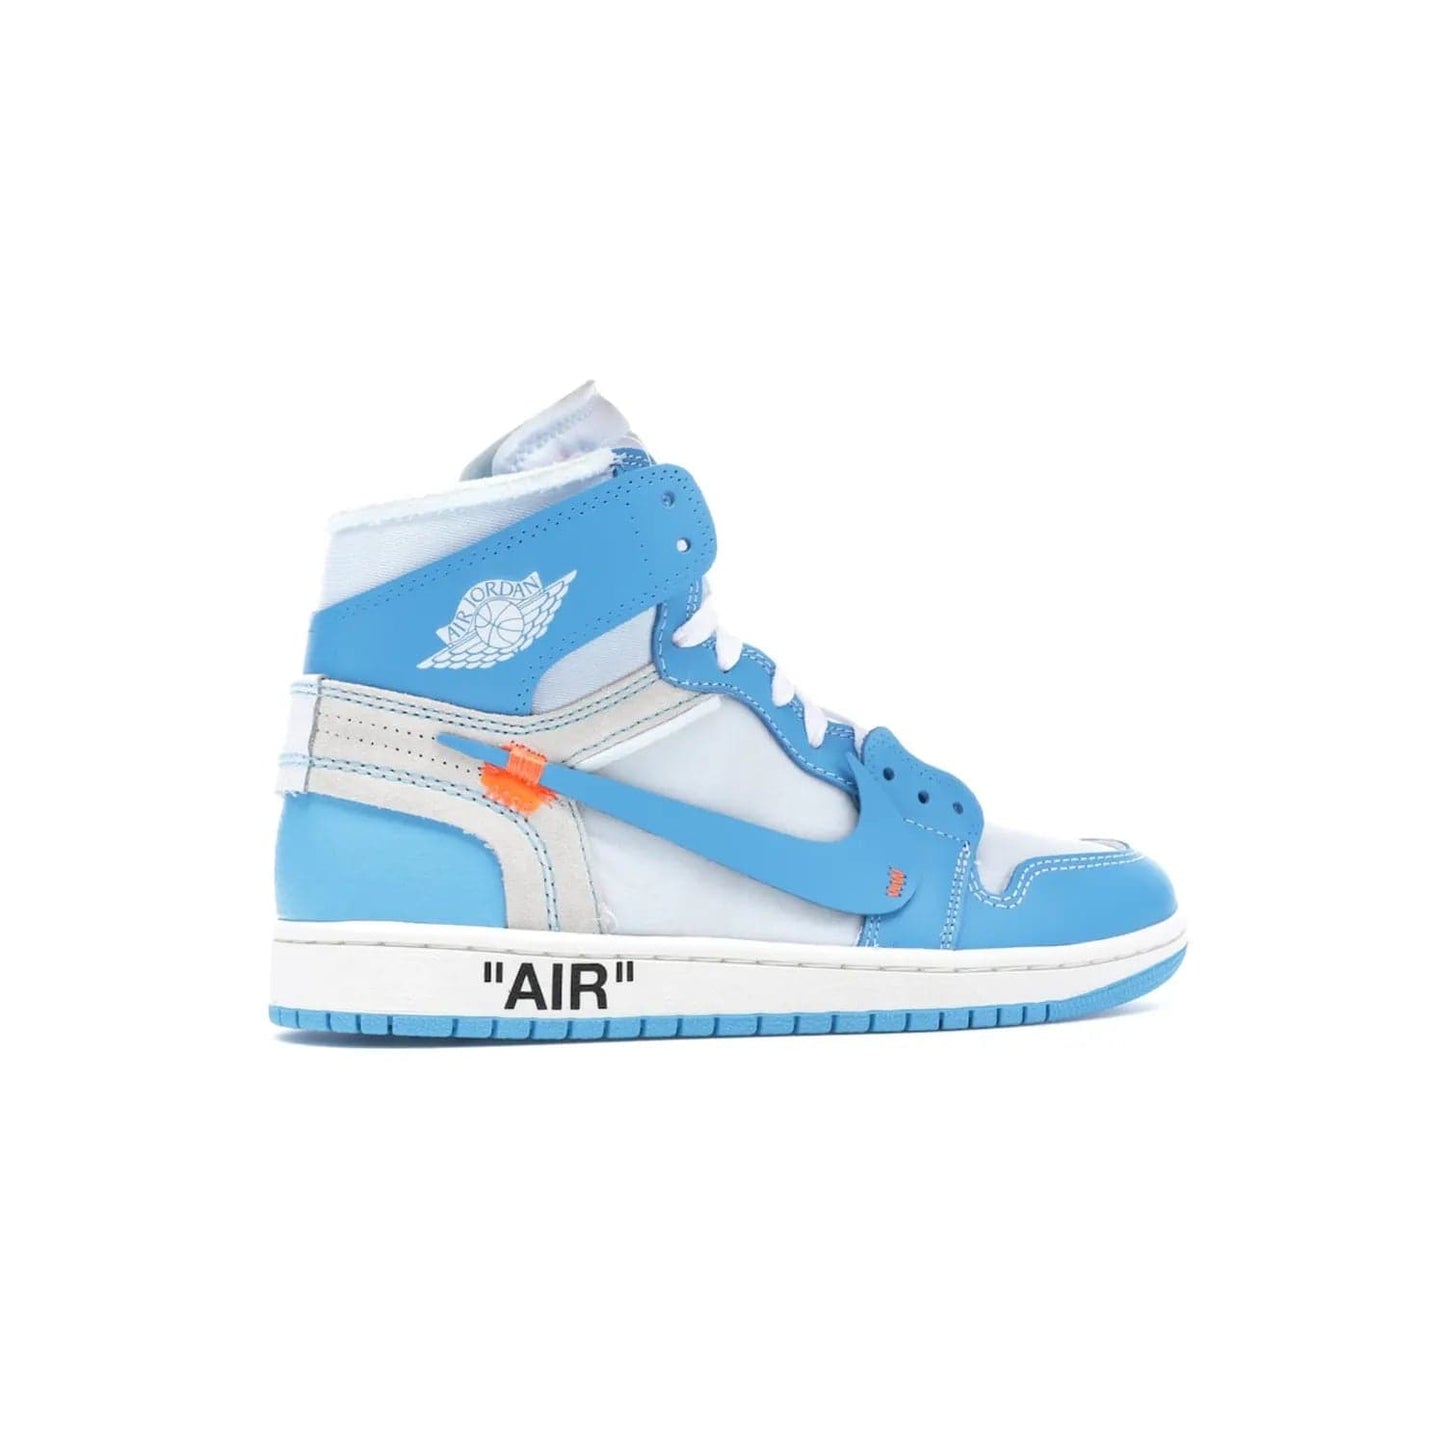 Jordan 1 Retro High Off-White University Blue - Image 35 - Only at www.BallersClubKickz.com - Classic Jordan 1 Retro High "Off-White UNC" sneakers meld style and comfort. Boasting deconstructed white and blue leather, Off-White detailing, and a white, dark powder blue and cone colorway, these sneakers are perfect for dressing up or down. Get the iconic Off-White Jordan 1's and upgrade your look.